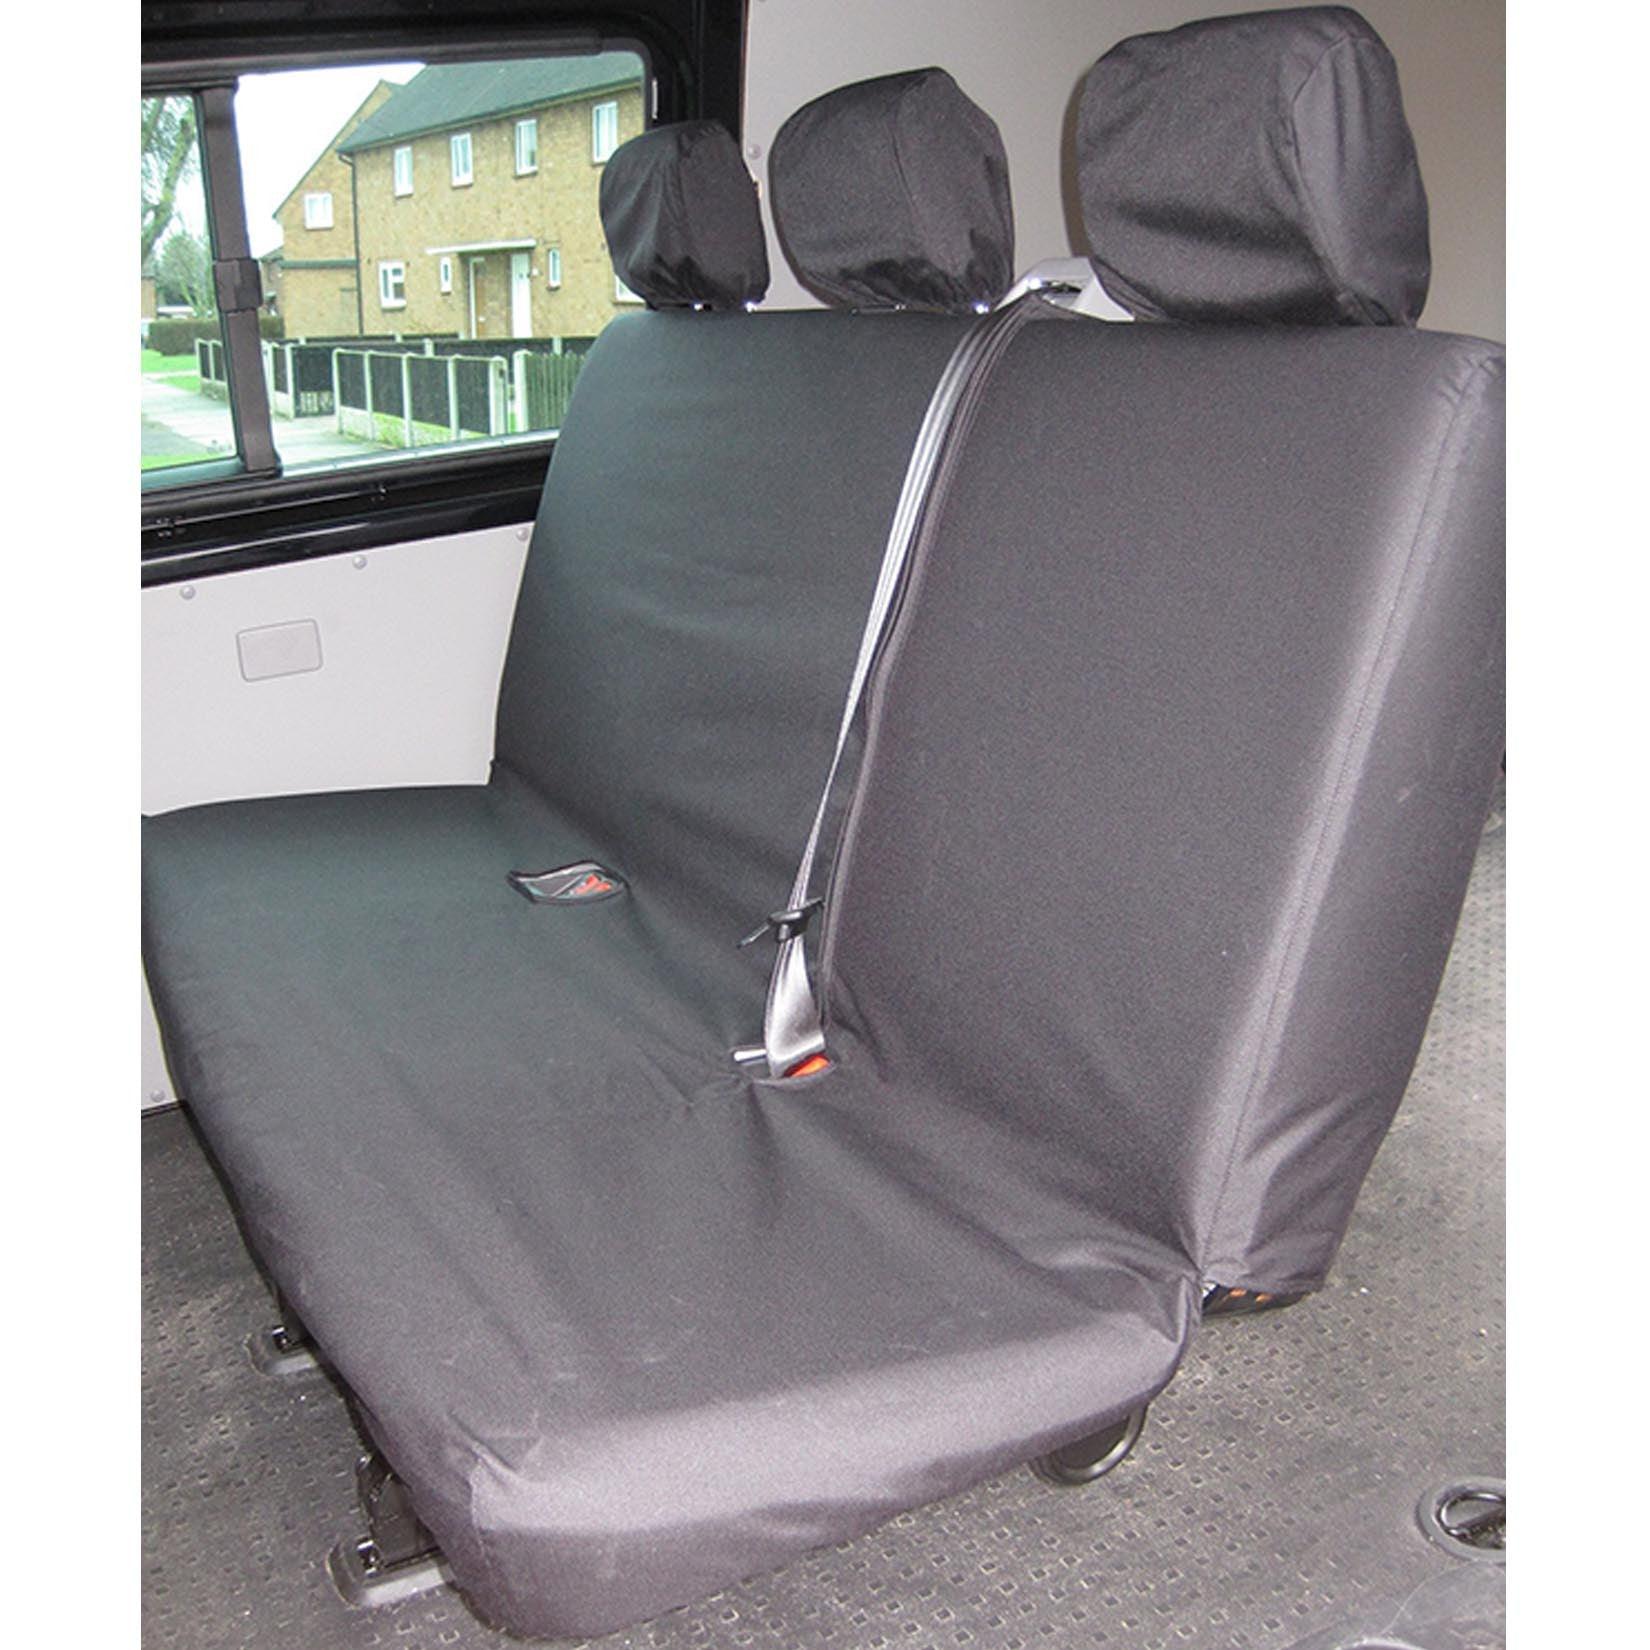 VW TRANSPORTER T5 T6 2010 ON REAR 3-SEATER BENCH PASSENGER SEAT COVERS – GREY - Storm Xccessories2